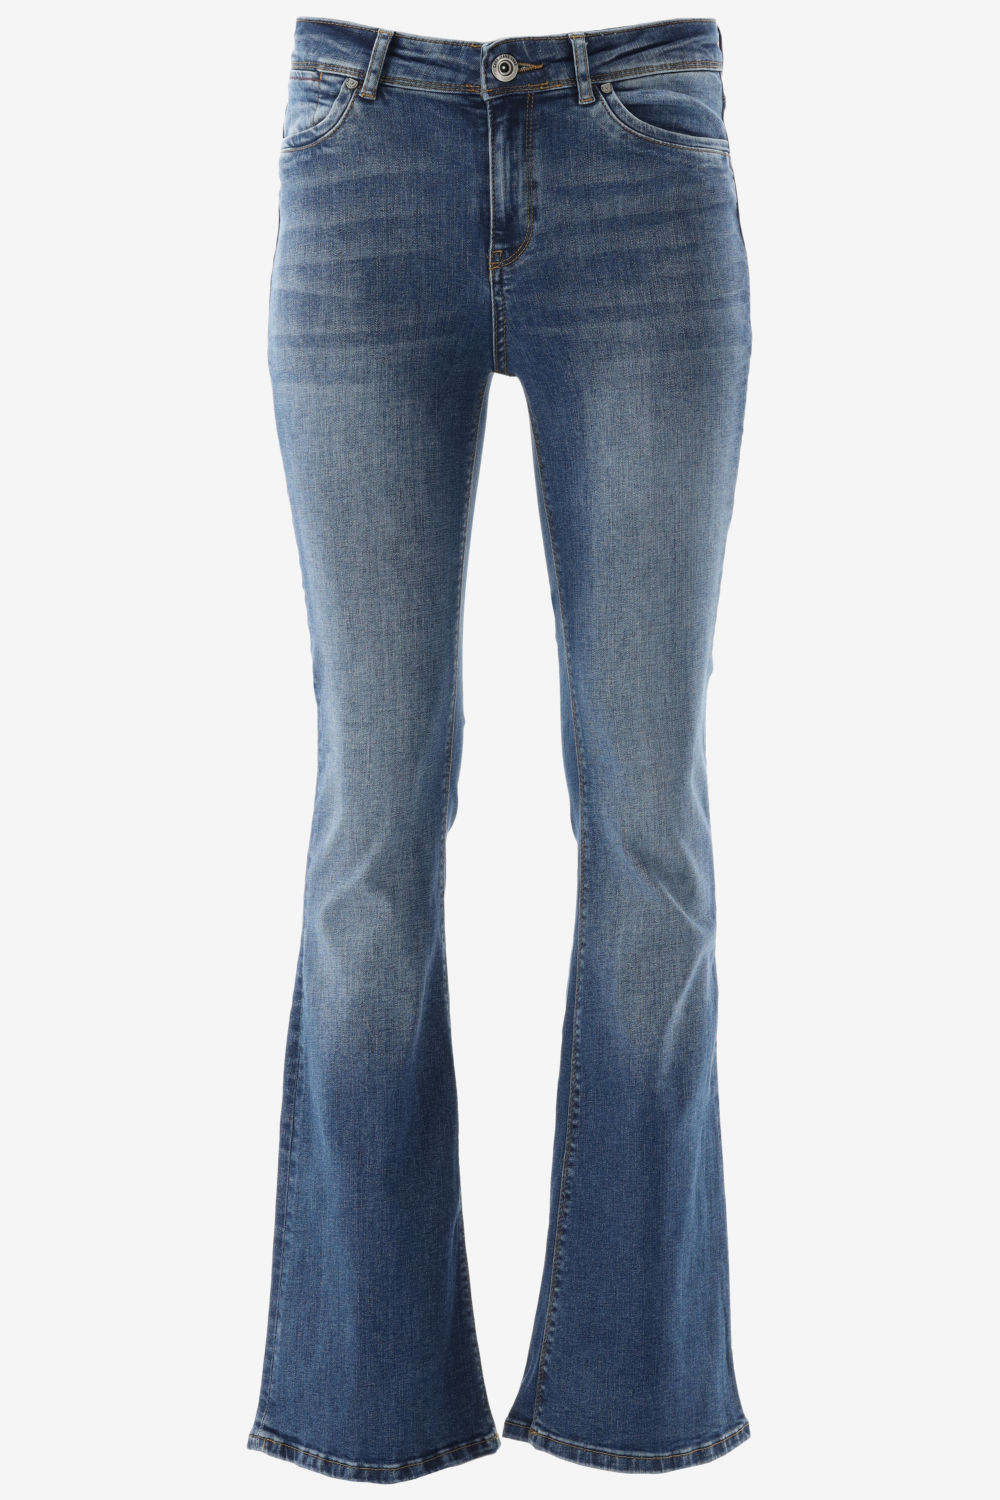 Cars Jeans Michelle Flare Den 78627 Stone Used Dames Maat - W26 X L32